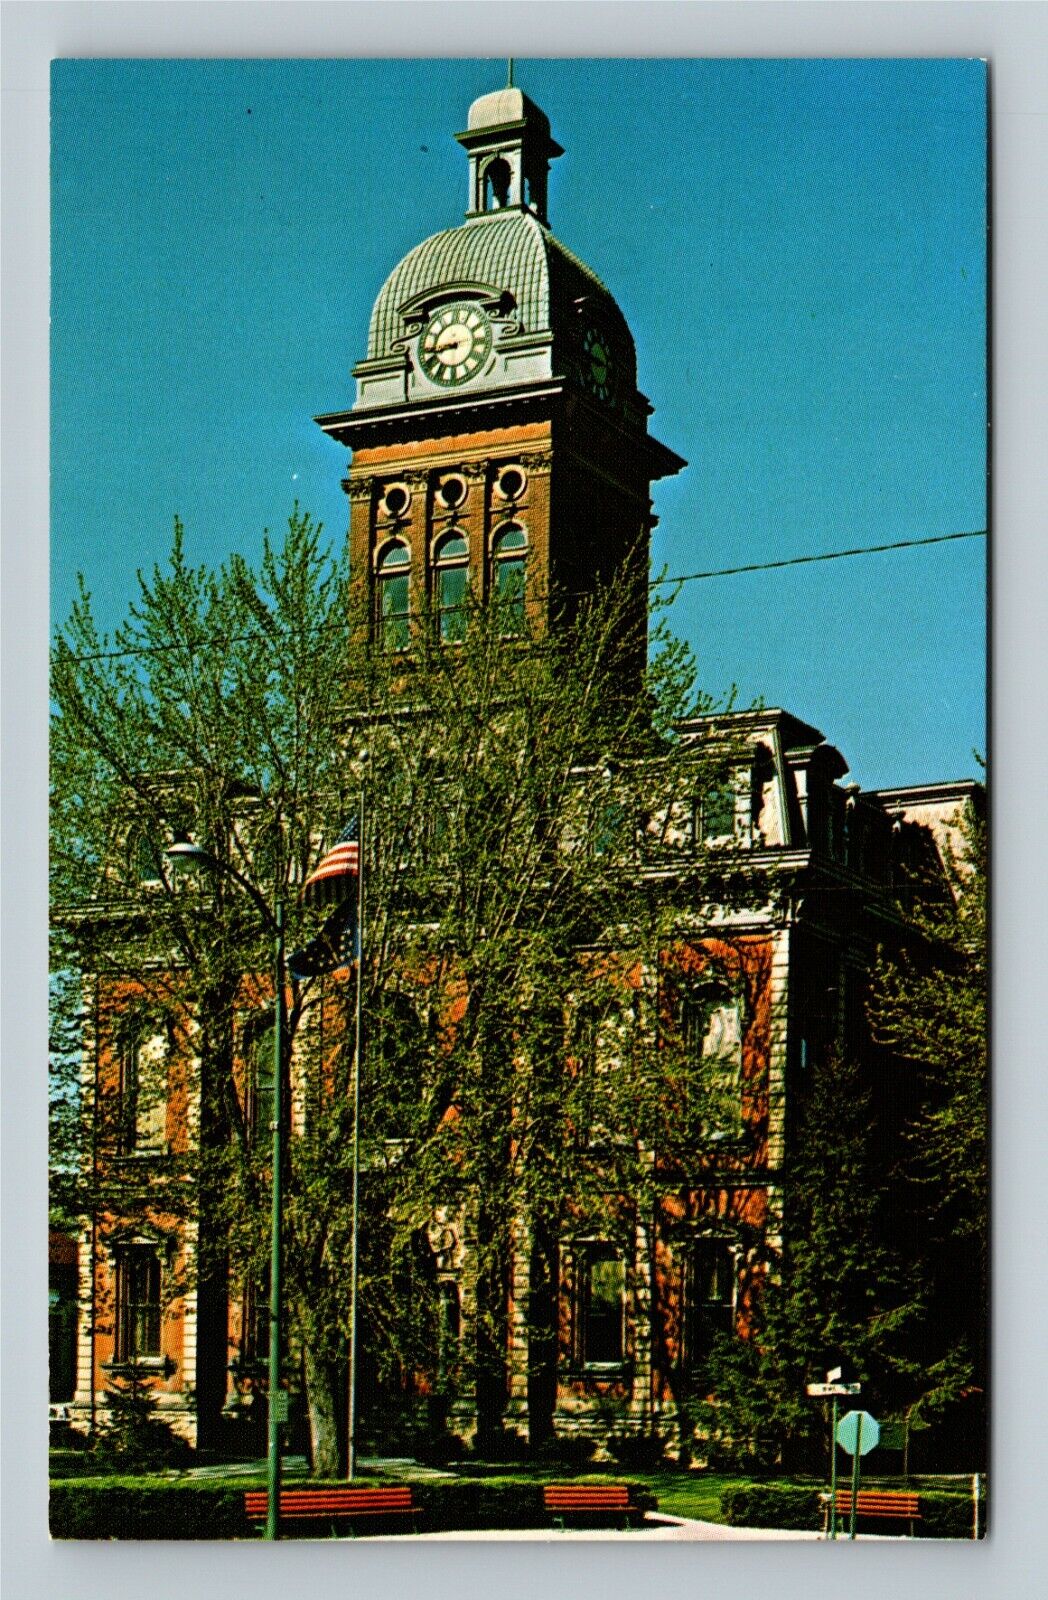 Decatur, Adams County Courthouse Built 1873, Clock Tower Chrome Indiana Postcard